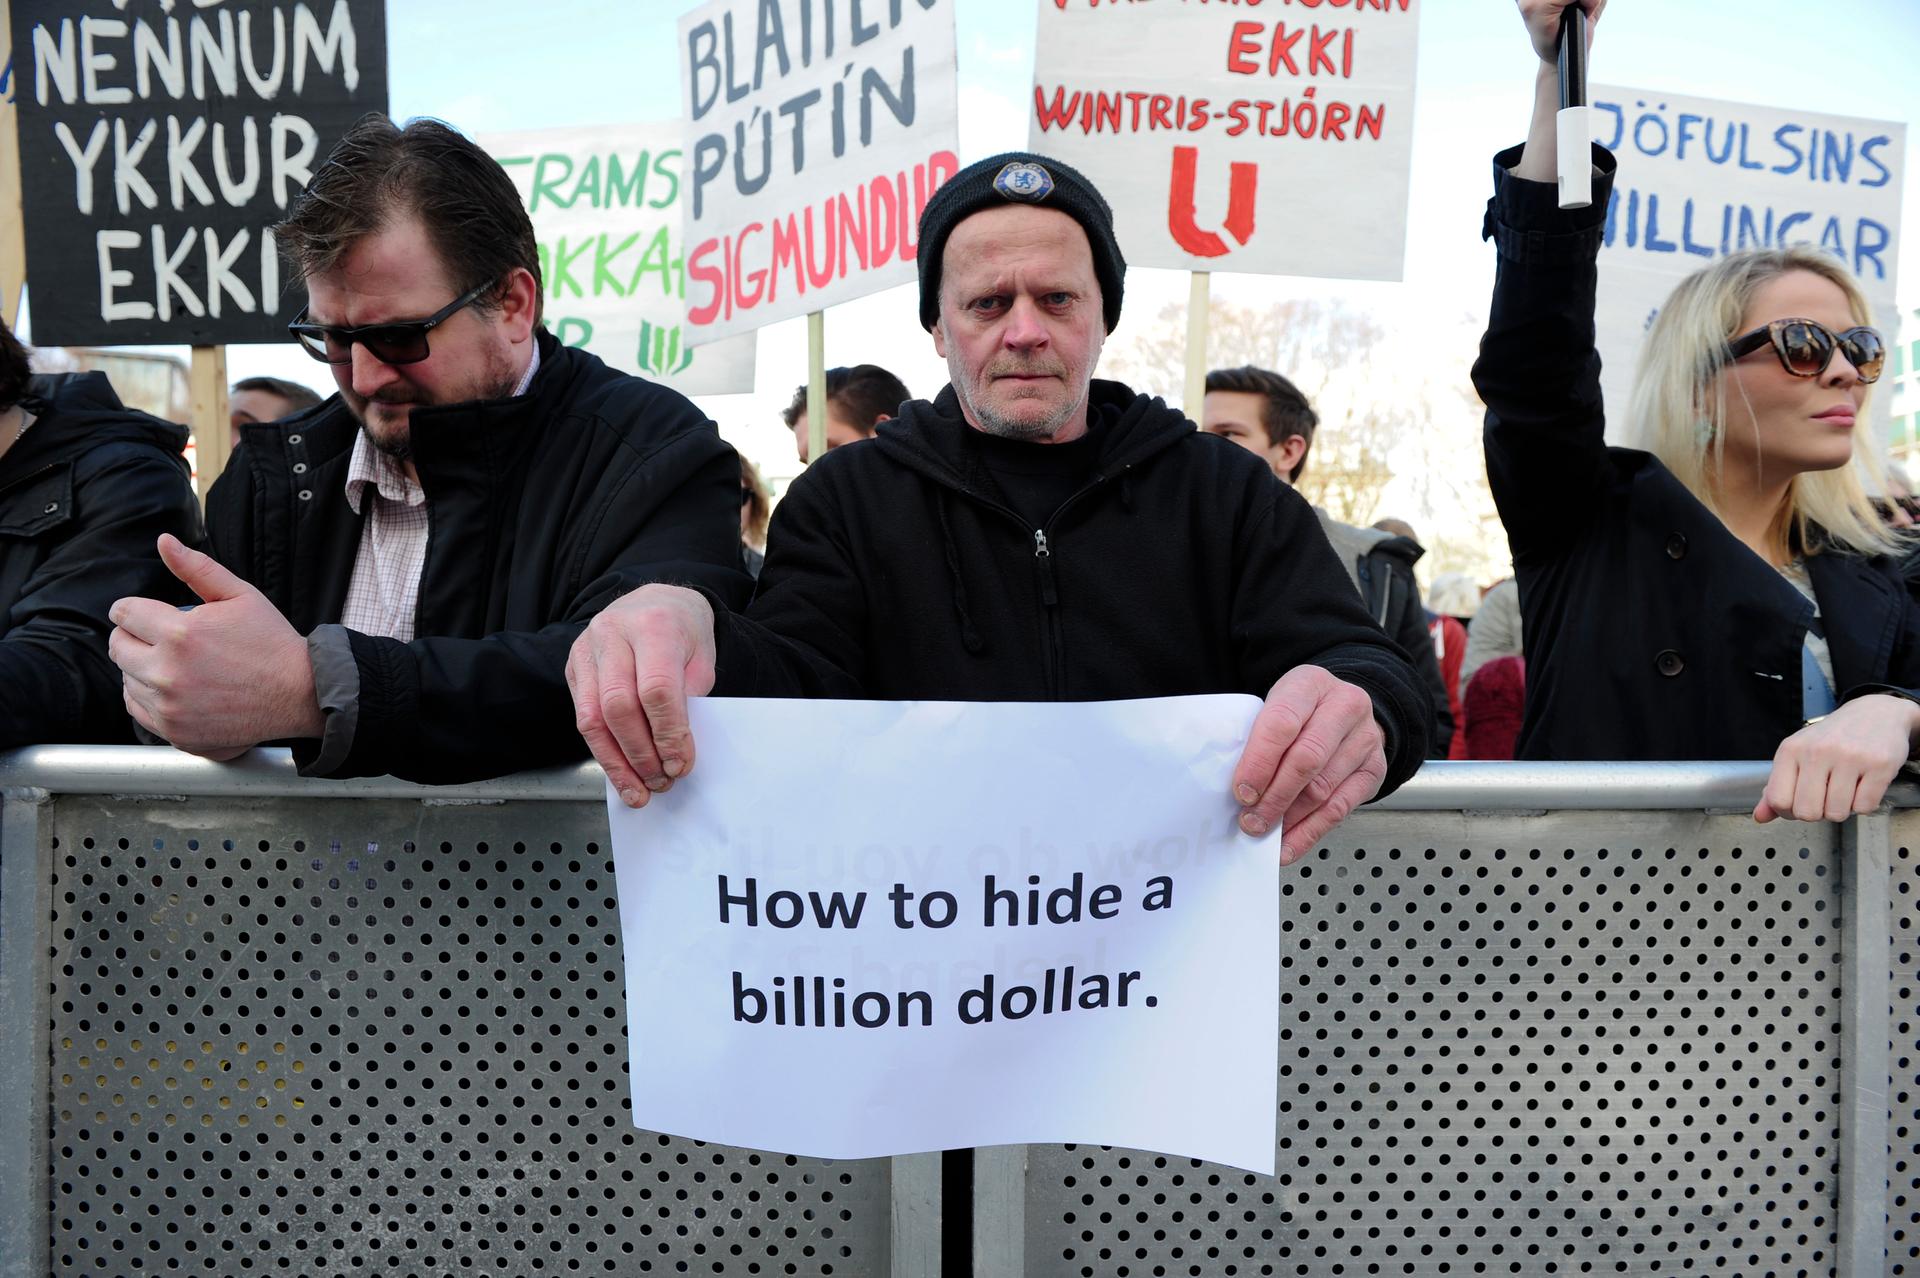 People demonstrate against Iceland's Prime Minister Sigmundur Gunnlaugsson in Reykjavik, Iceland on April 4, 2016 after a leak of documents by so-called Panama Papers stoked anger over his wife owning a tax haven-based company with large claims on the cou